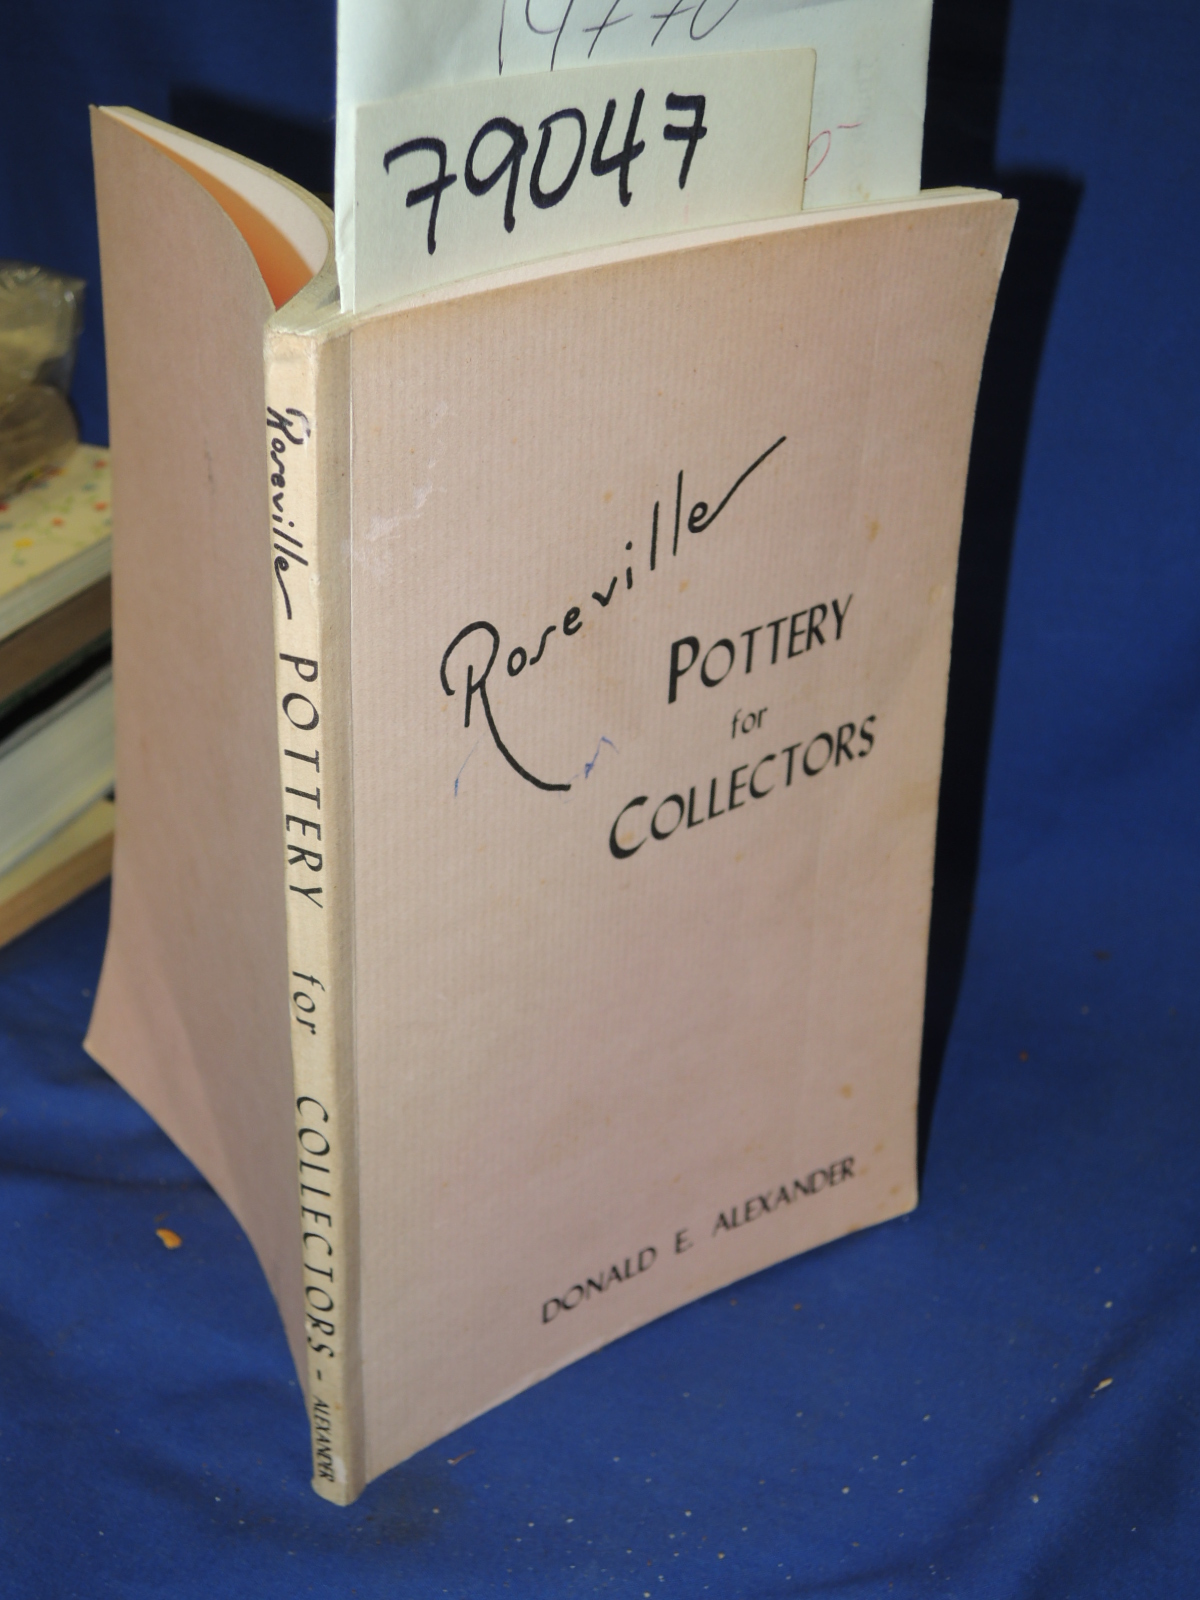 Alexander, Donald E.: ROSEVILLE POTTERY FOR COLLECTORS